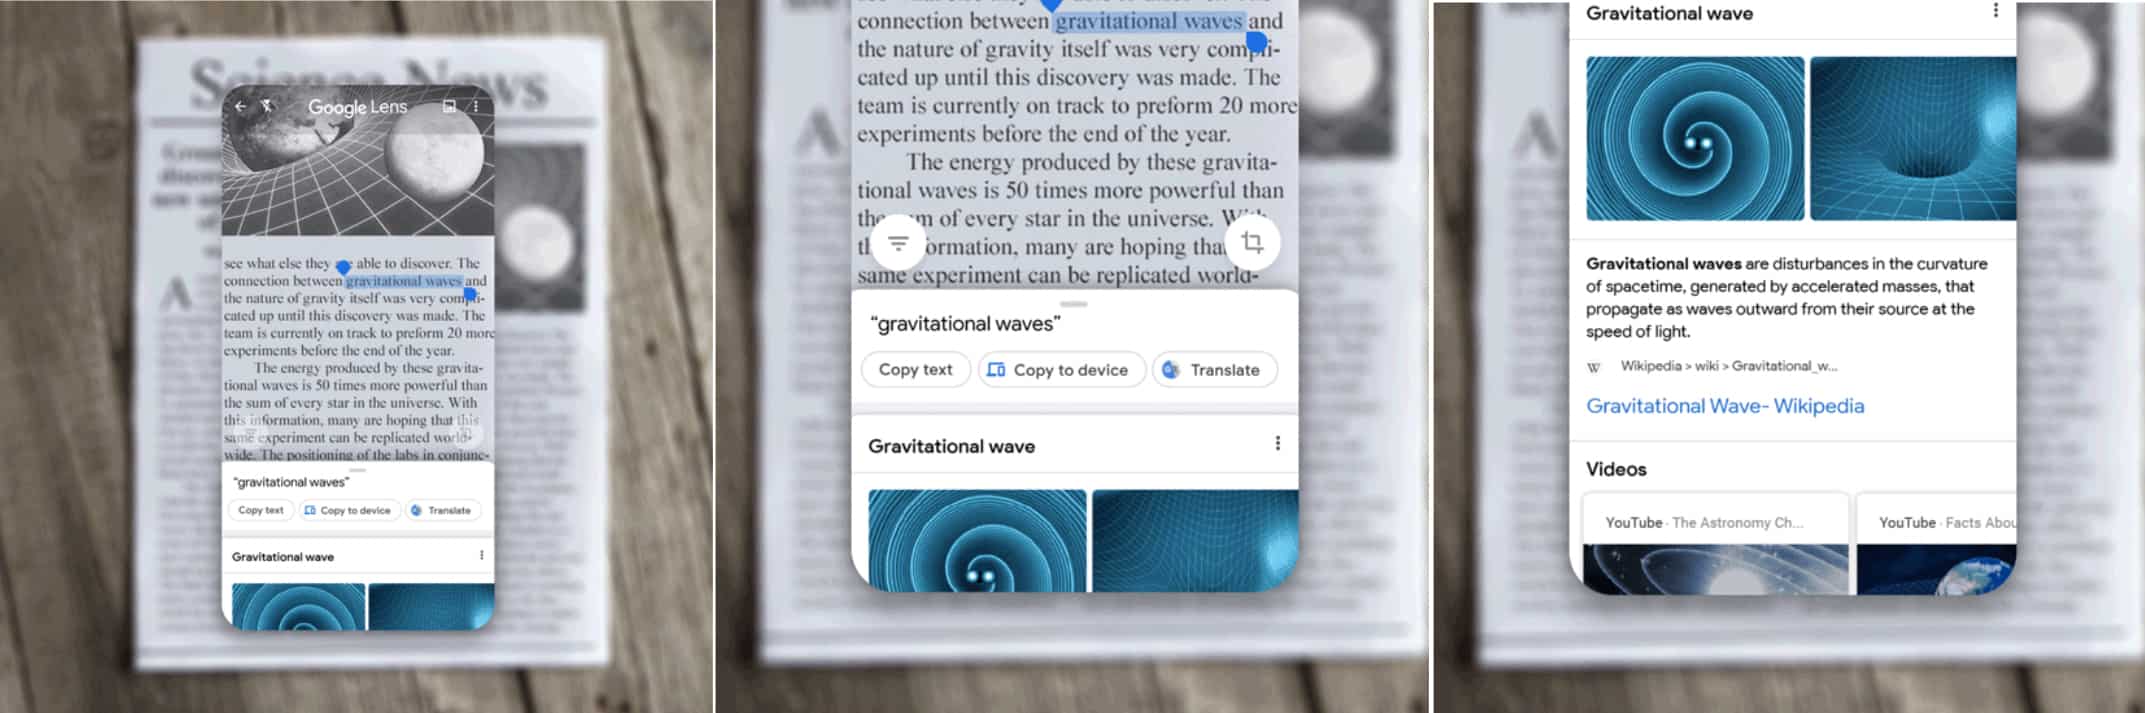 Google Lens new features